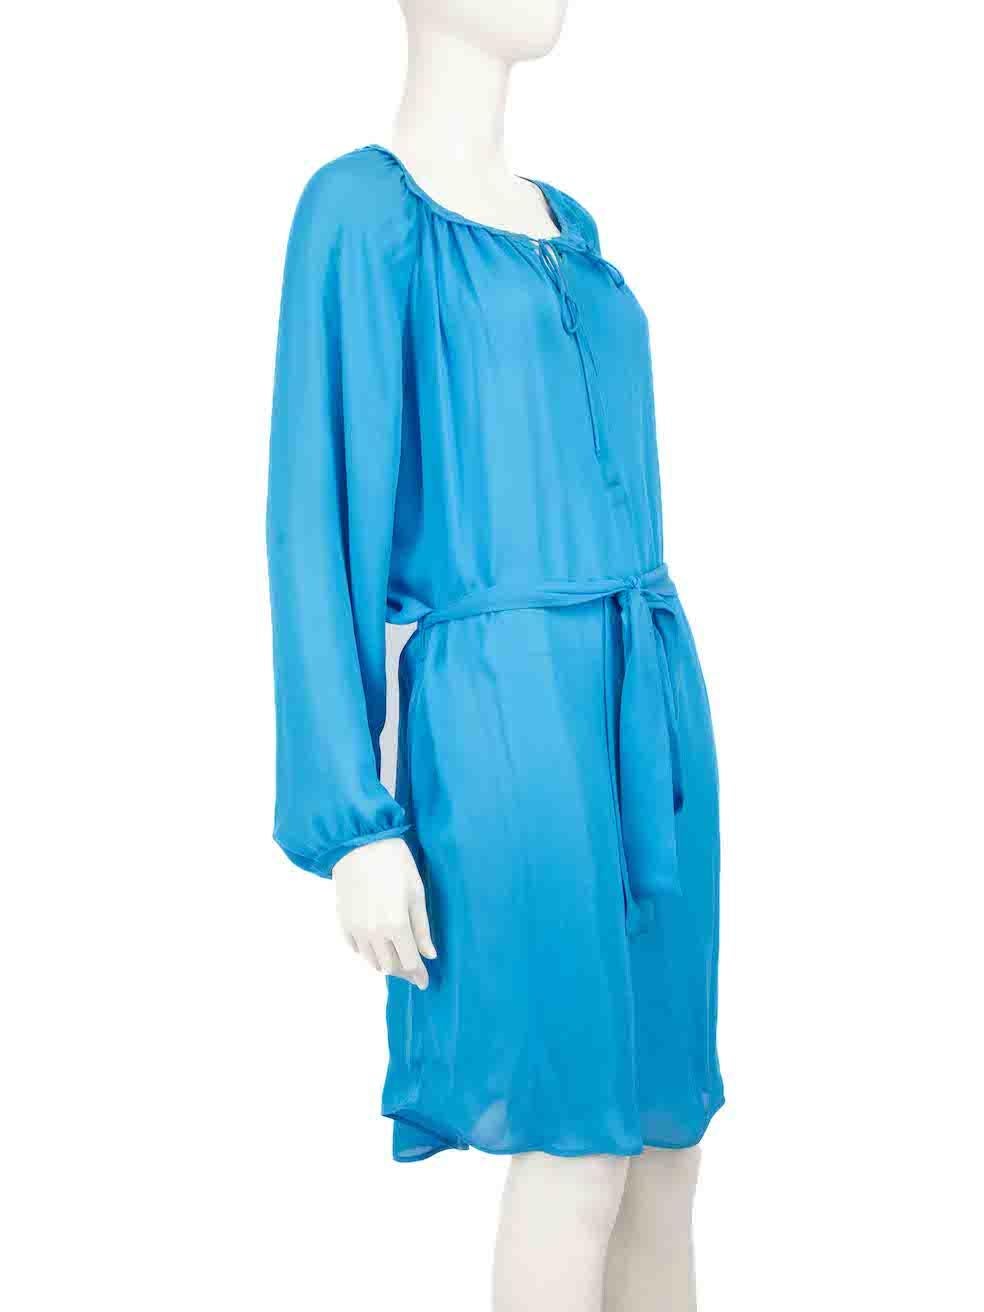 CONDITION is Very good. Minimal wear to dress is evident. Minimal wear to the neckline is seen with discolouration marks on this used Emilio Pucci designer resale item.
 
 
 
 Details
 
 
 Blue
 
 Silk
 
 Mini dress
 
 Sheer
 
 V neckline
 
 Front